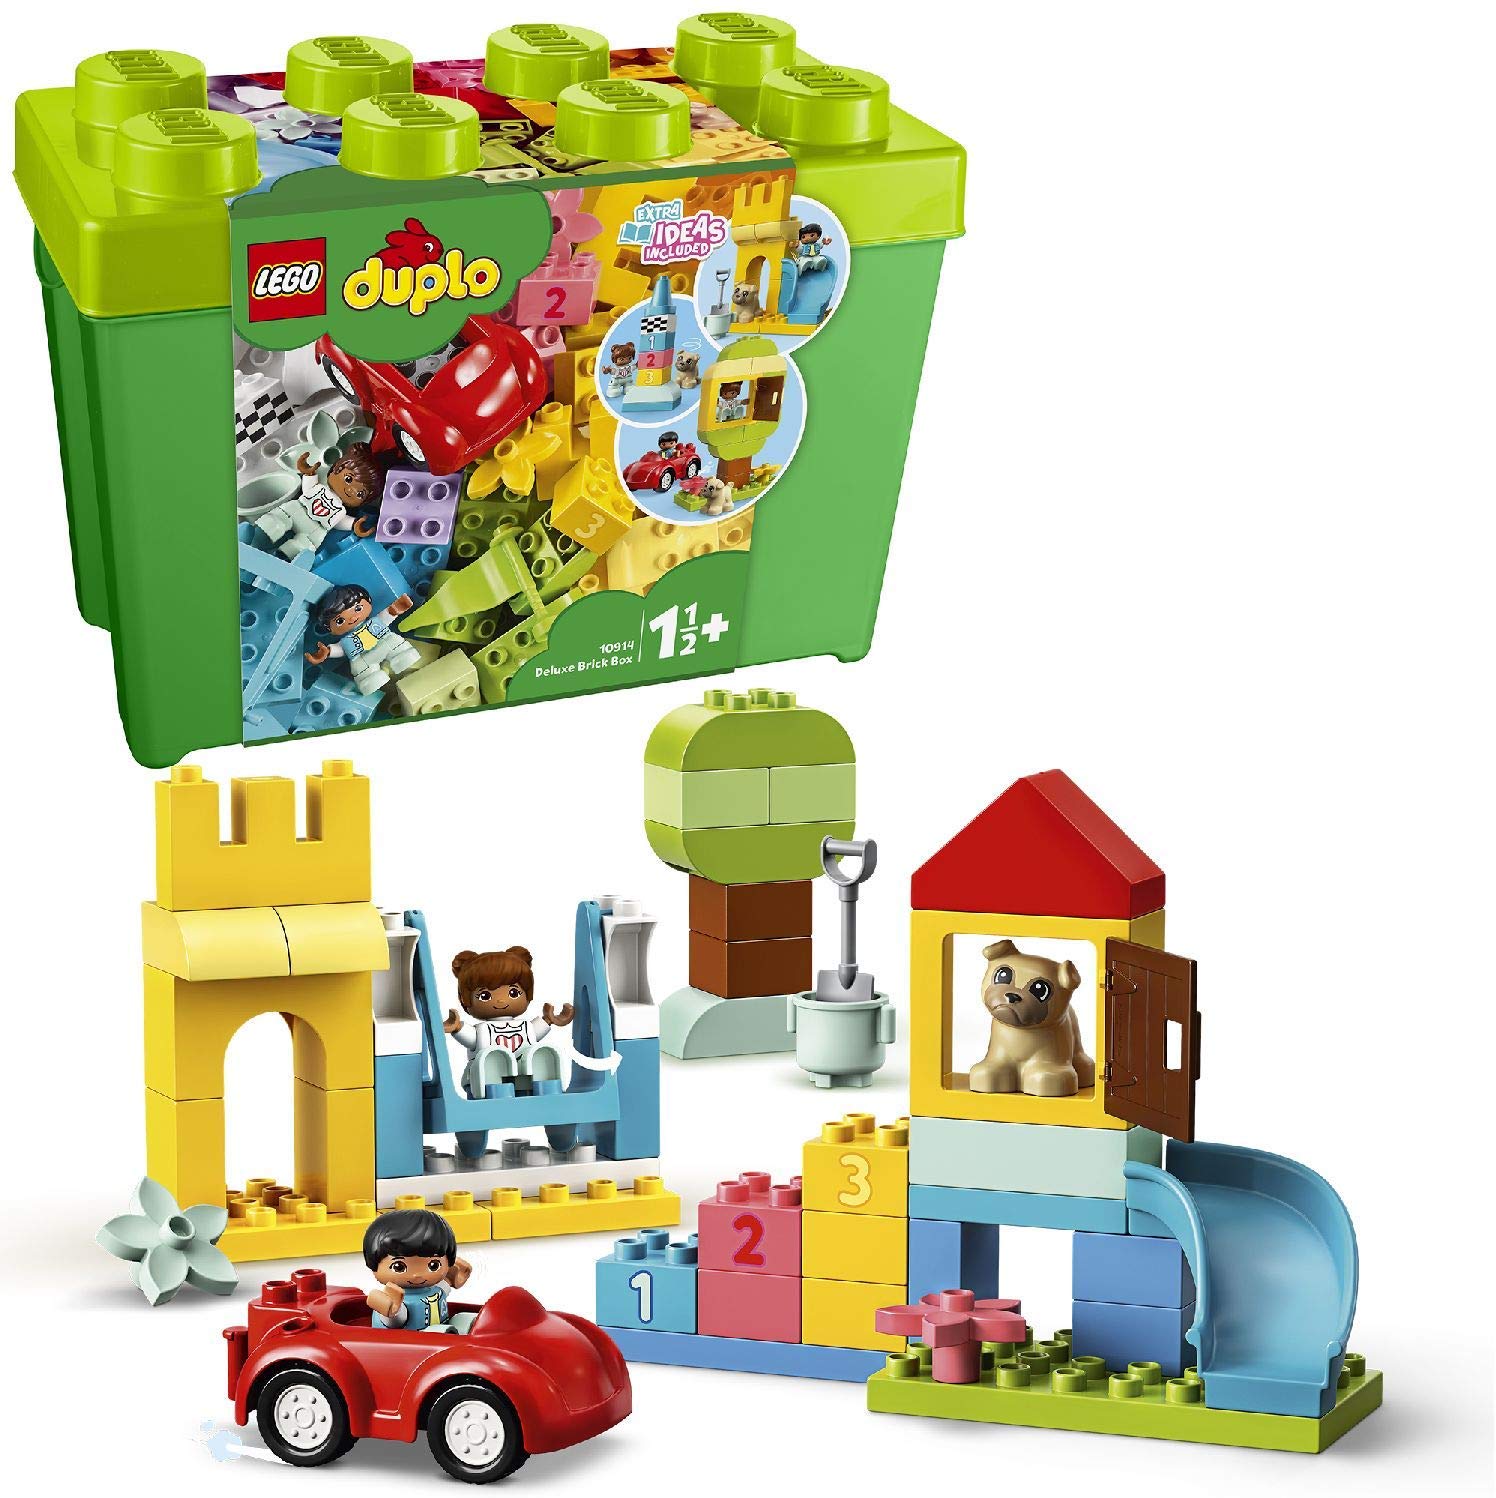 Lego 10914 Duplo Deluxe Stone Box Construction Kit With Storage Box, First 